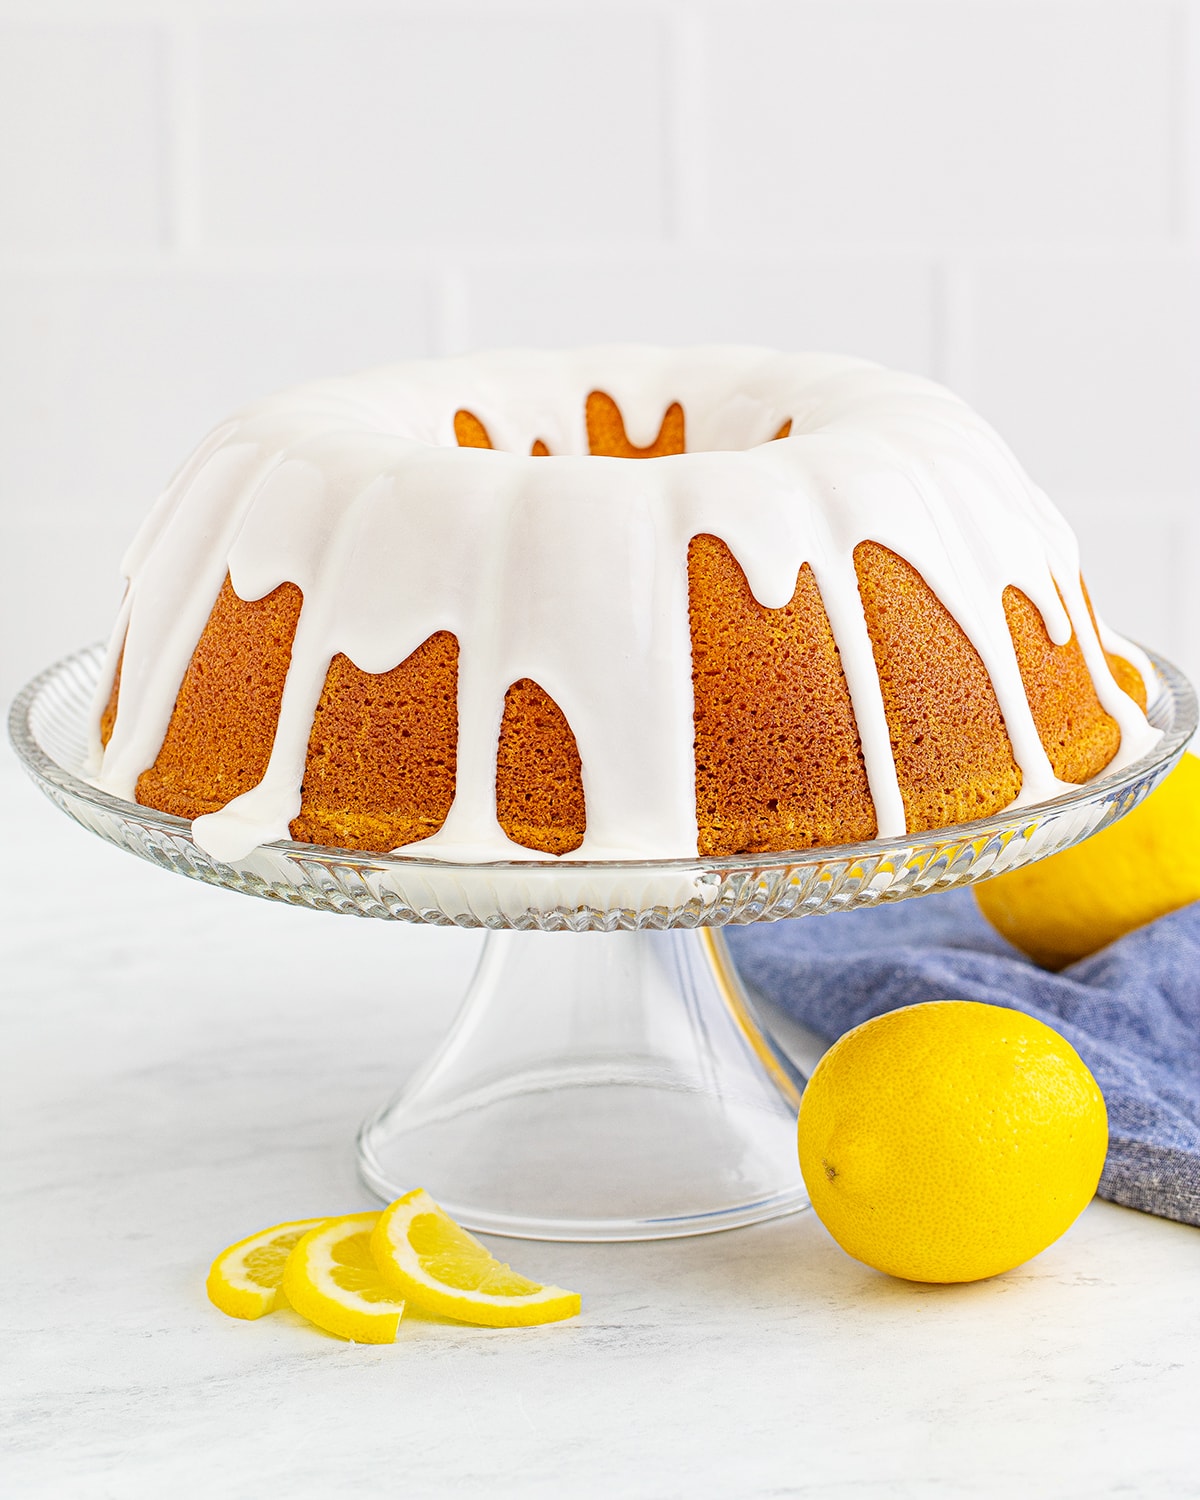 A bundt cake on a glass cake stand covered in a white glaze. 